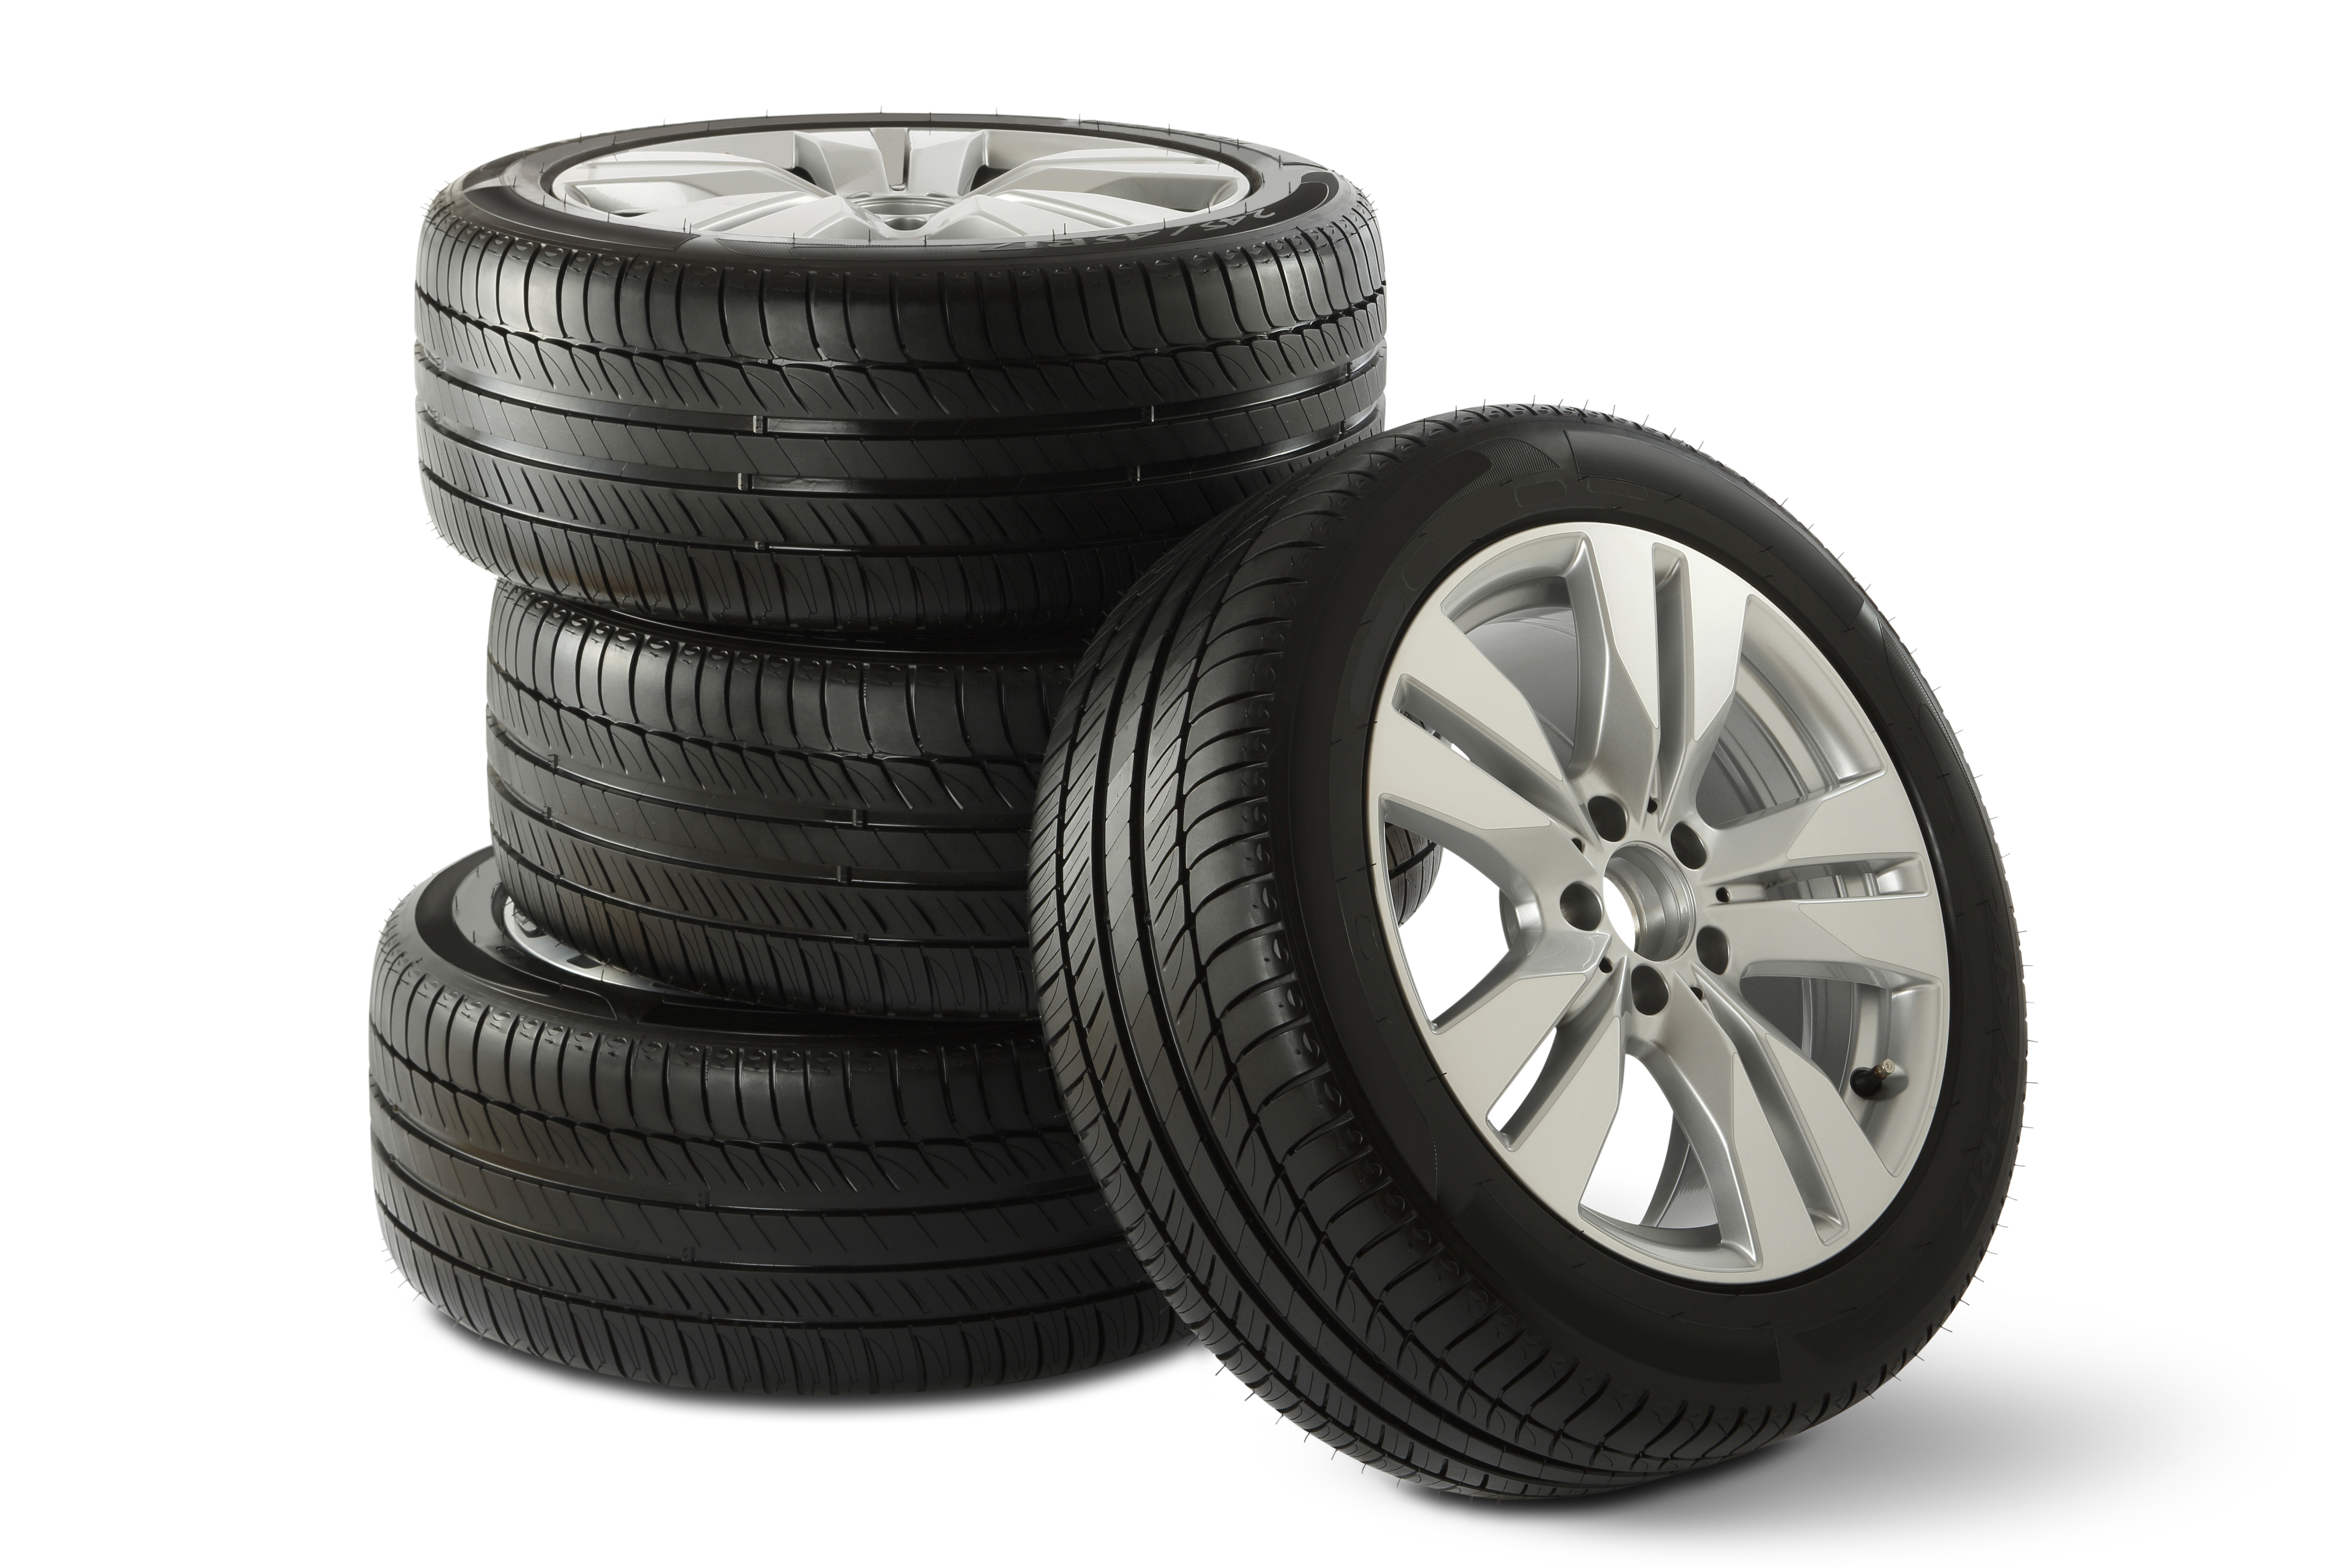 The 10 Best Tires Sites in 2020 | Sitejabber Consumer Reviews